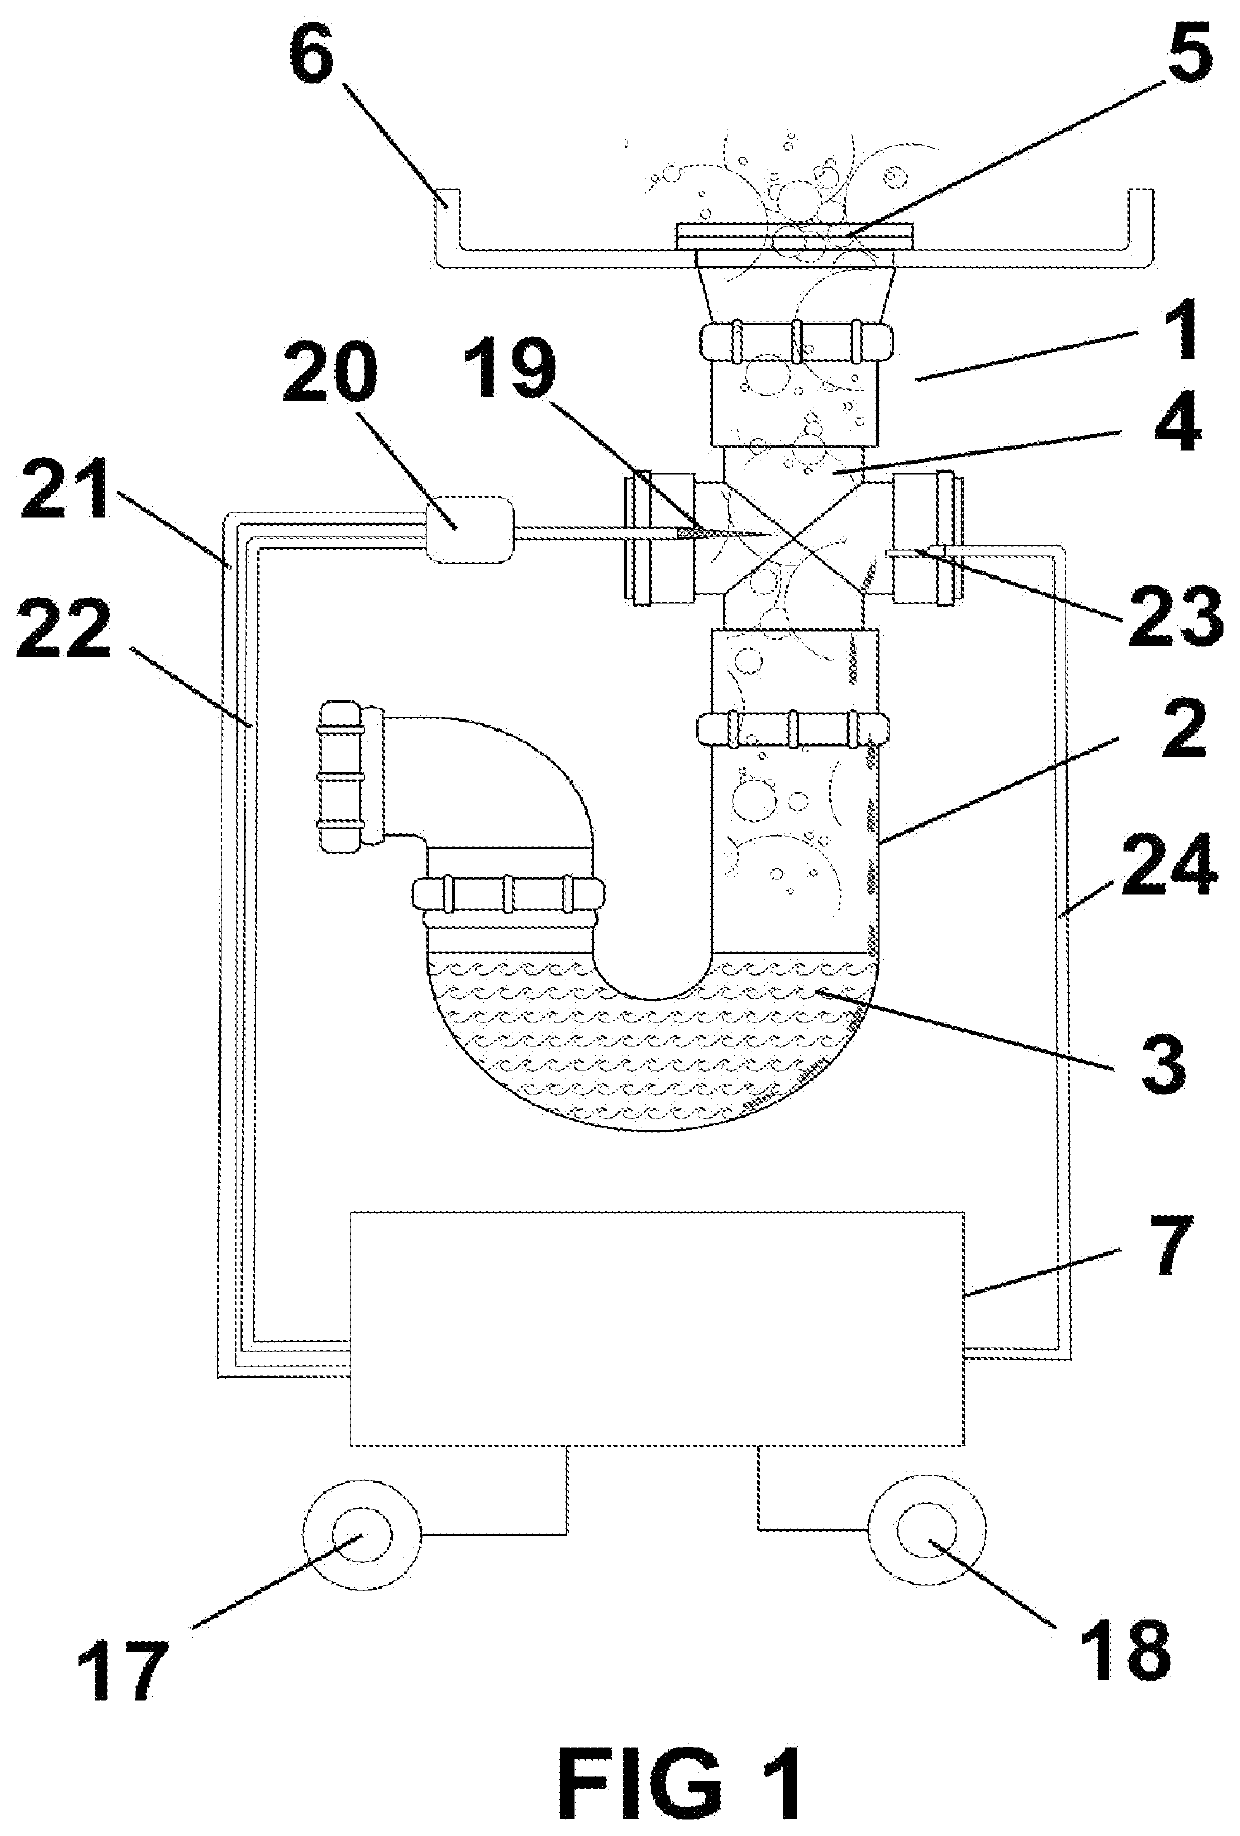 Air freshener and automated unblocking device for plumbing trap for sinks, wash basins or similar